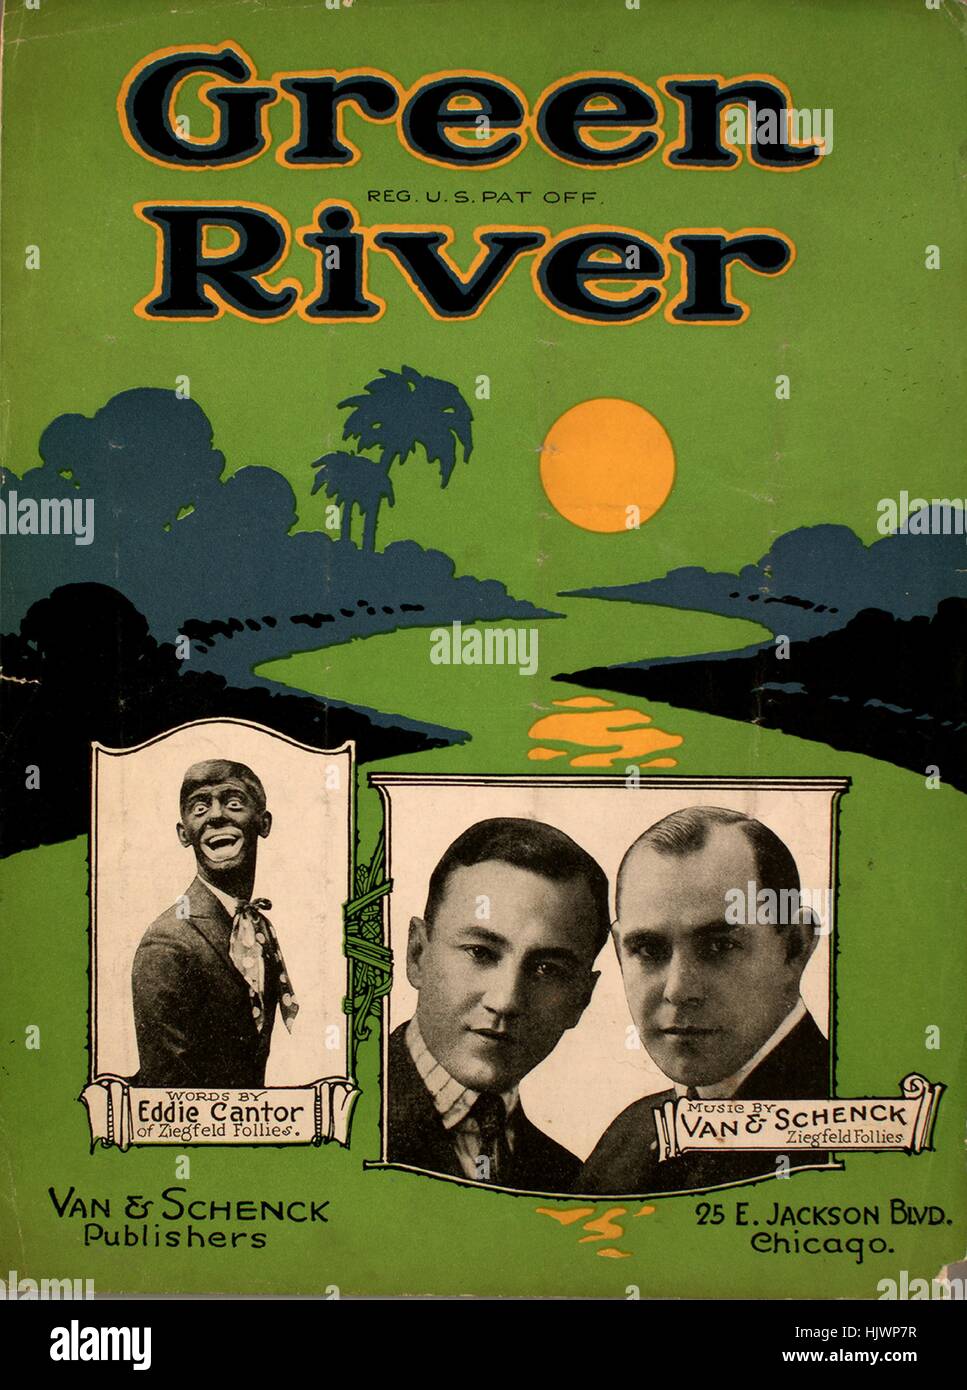 Sheet music cover image of the song 'Green River', with original authorship  notes reading 'Words by Eddie Cantor of Ziegfeld Follies Music by Van and  Schench, Ziegfeld Follies Arr by Jean Walz',